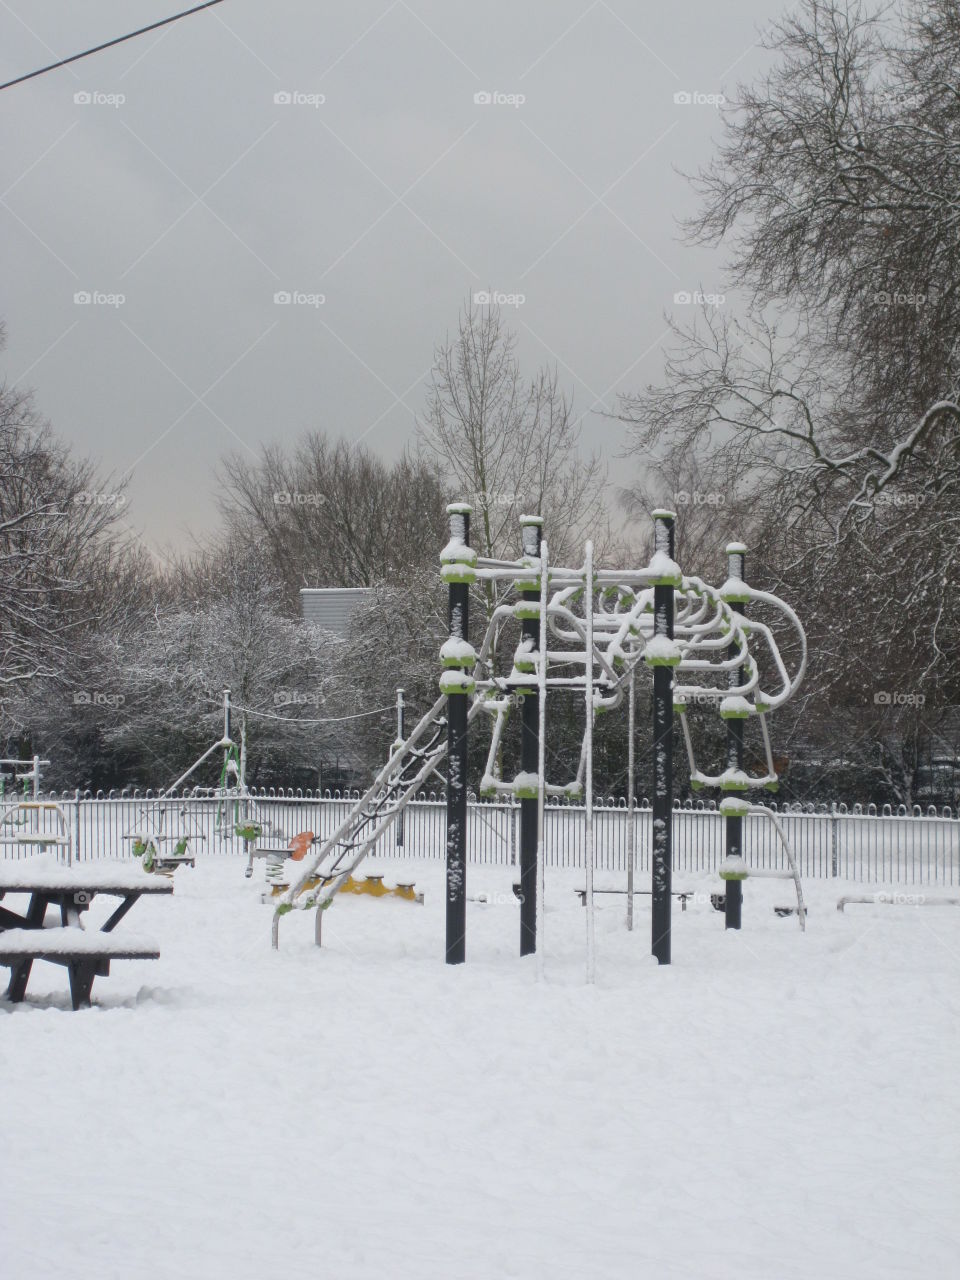 playground in the park in winter